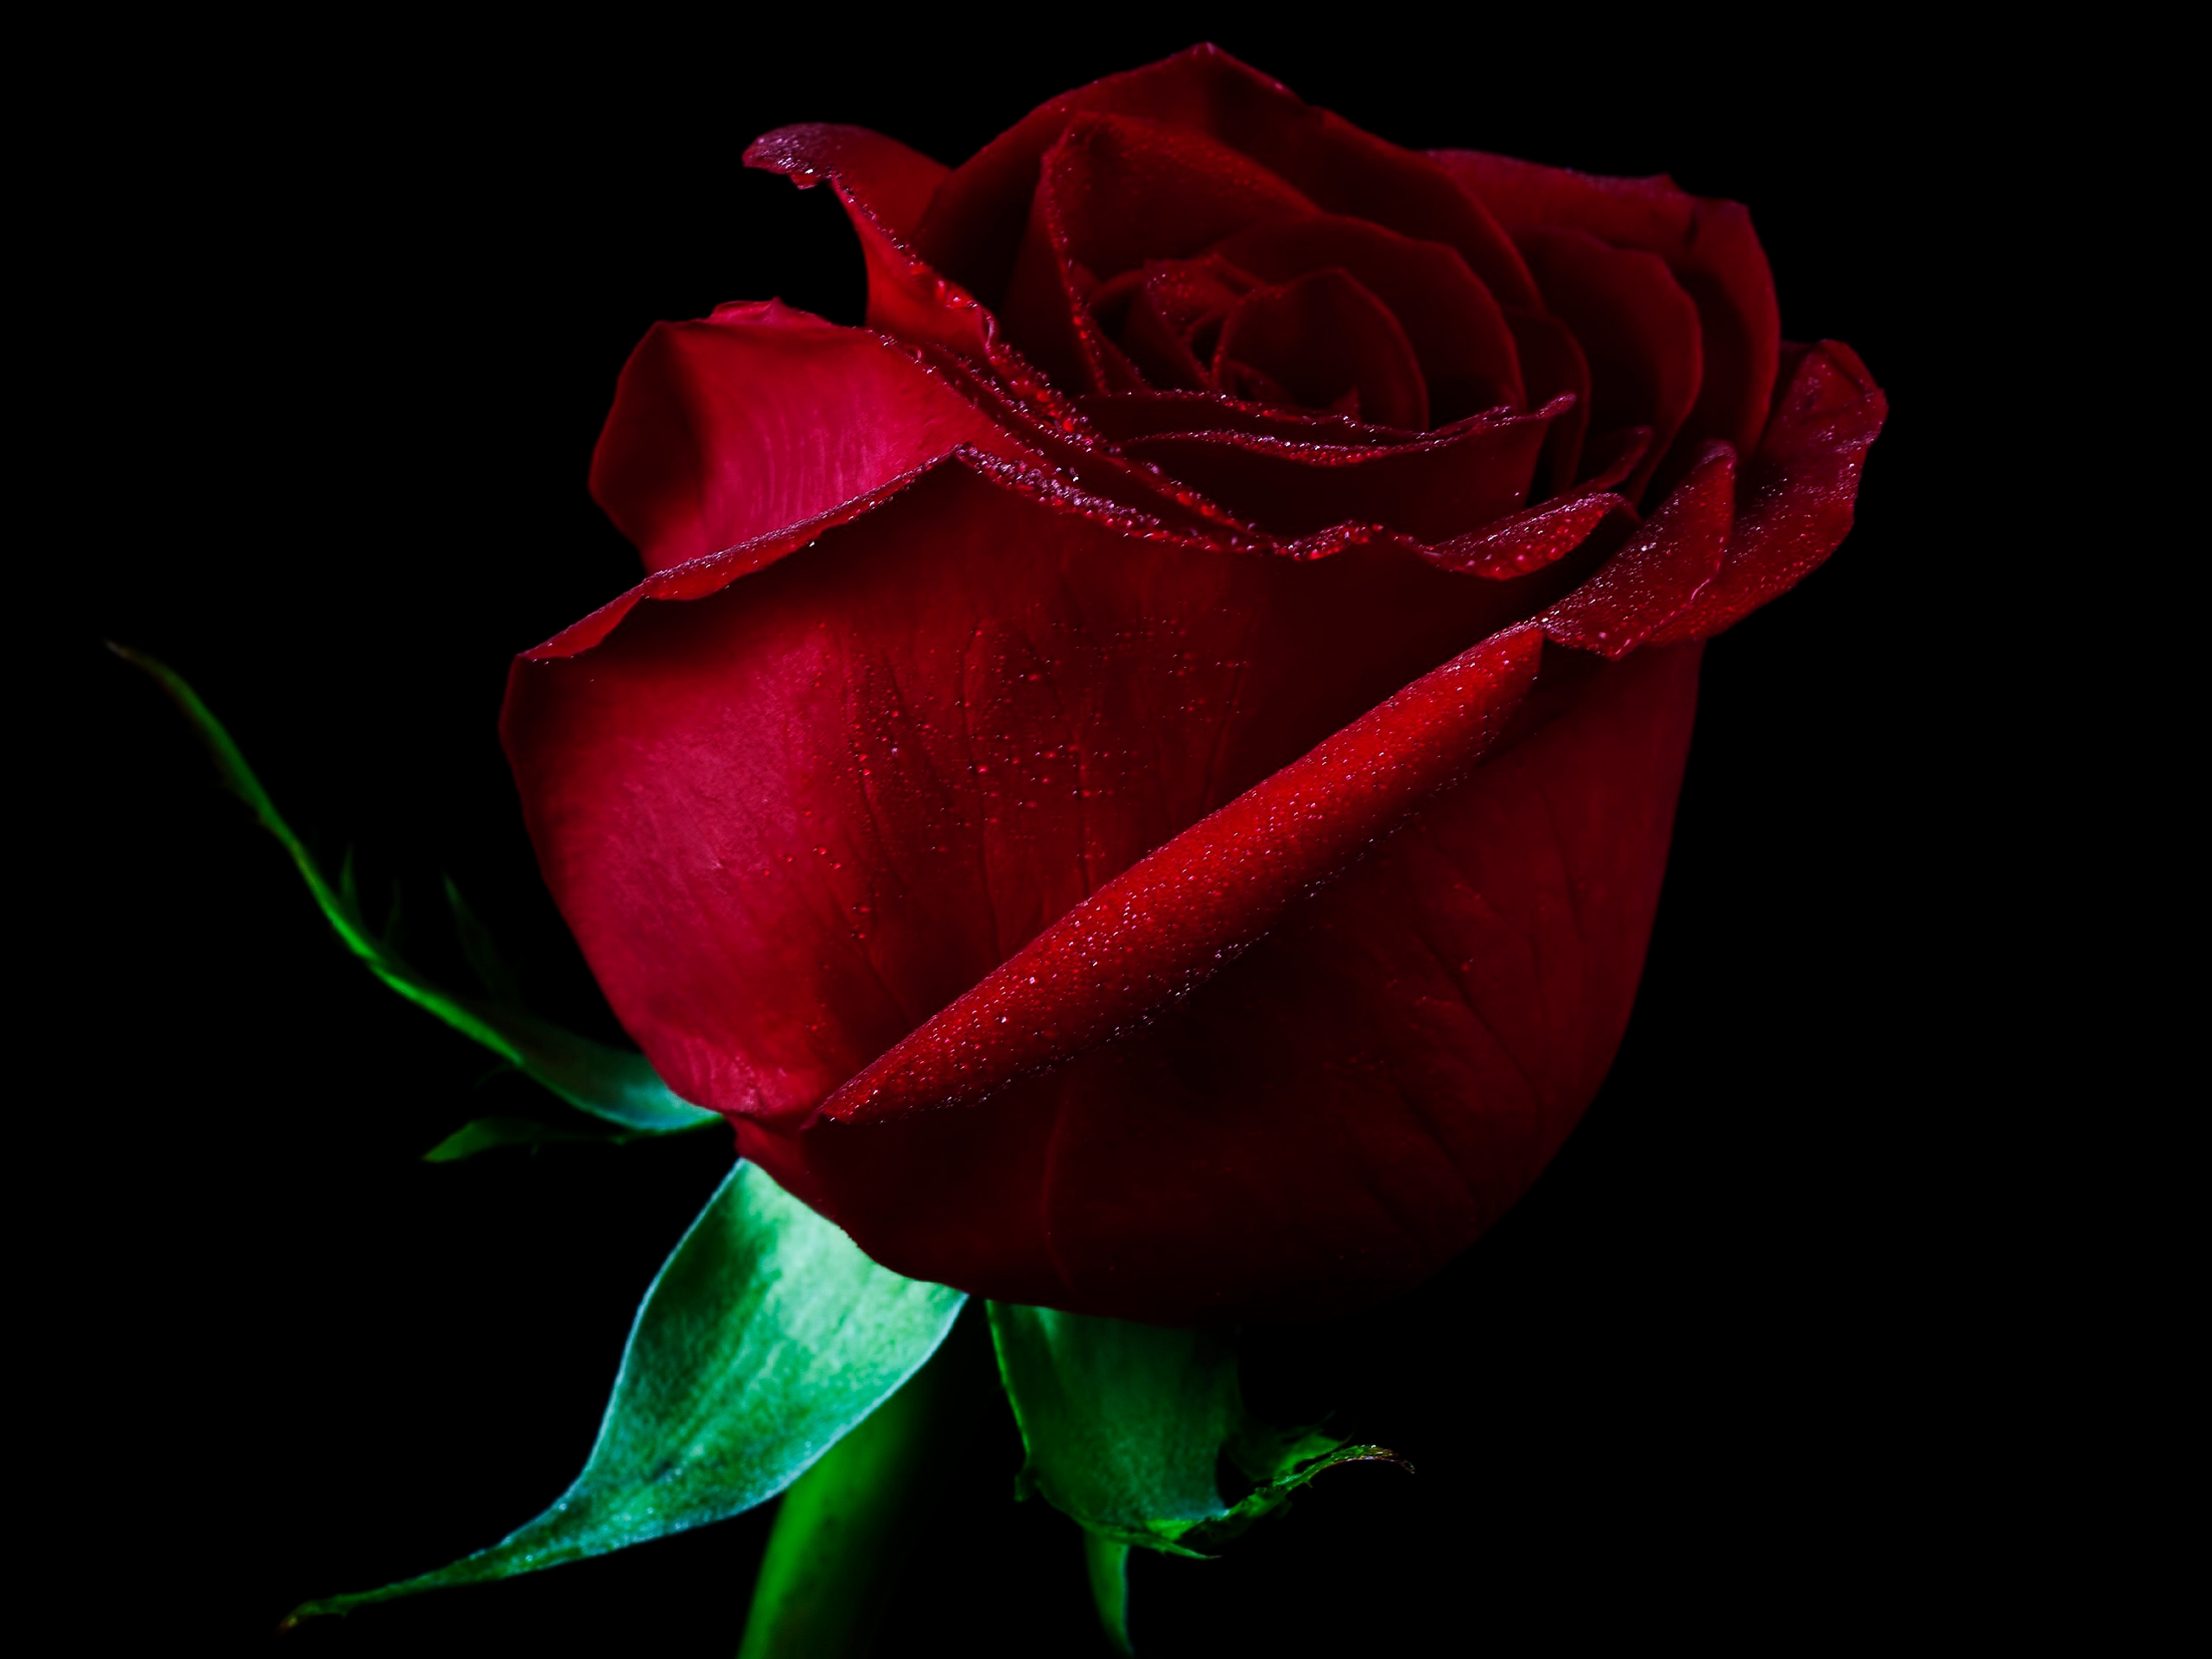 Single Red Rose Full HD Wallpaper and Background Image | 2560x1920 ...